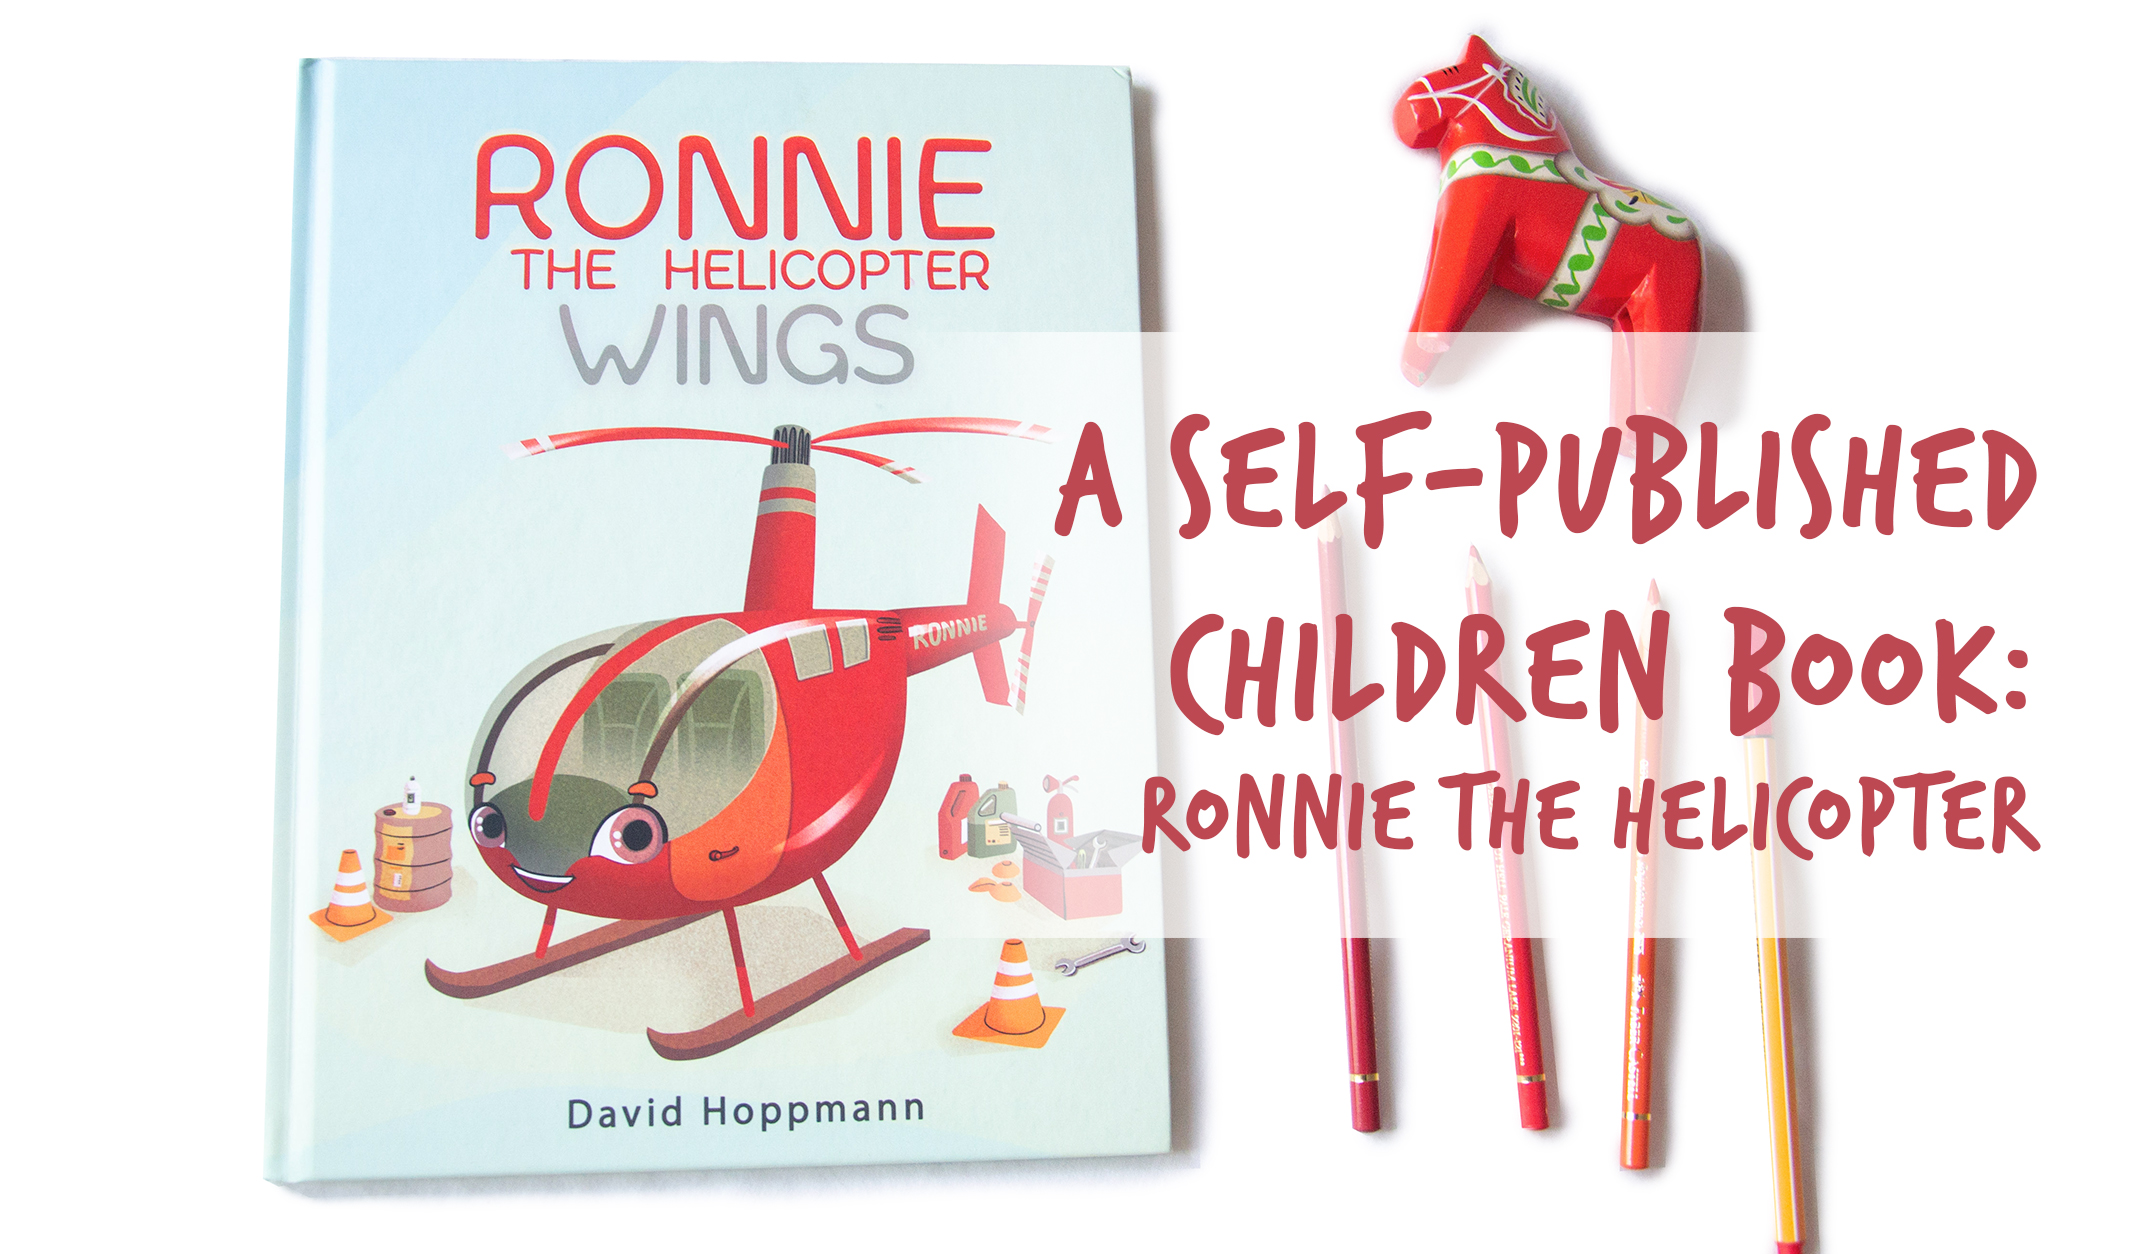 Ronnie the helicopter : a self published children book.